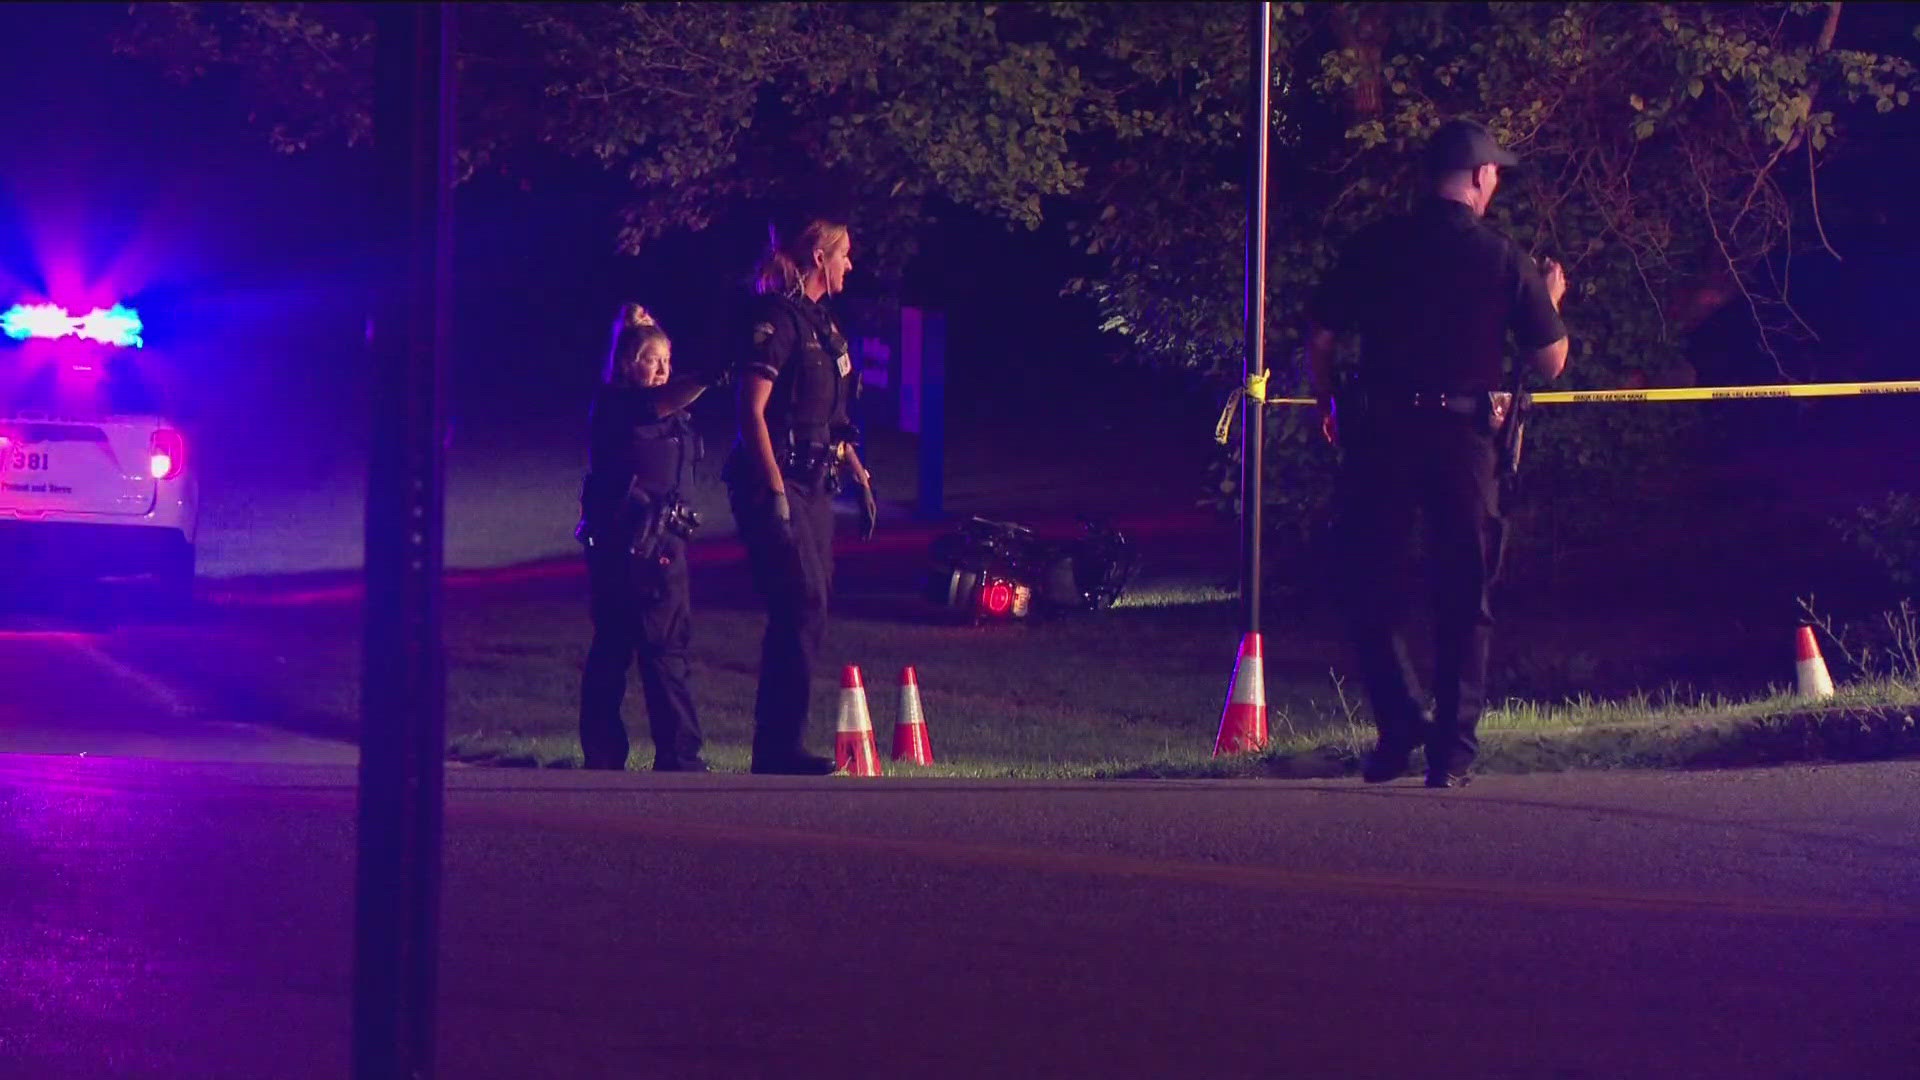 Toledo police told WTOL the motorcyclist was found after another motorist spotted them laying in a grassy area off of the roadway.